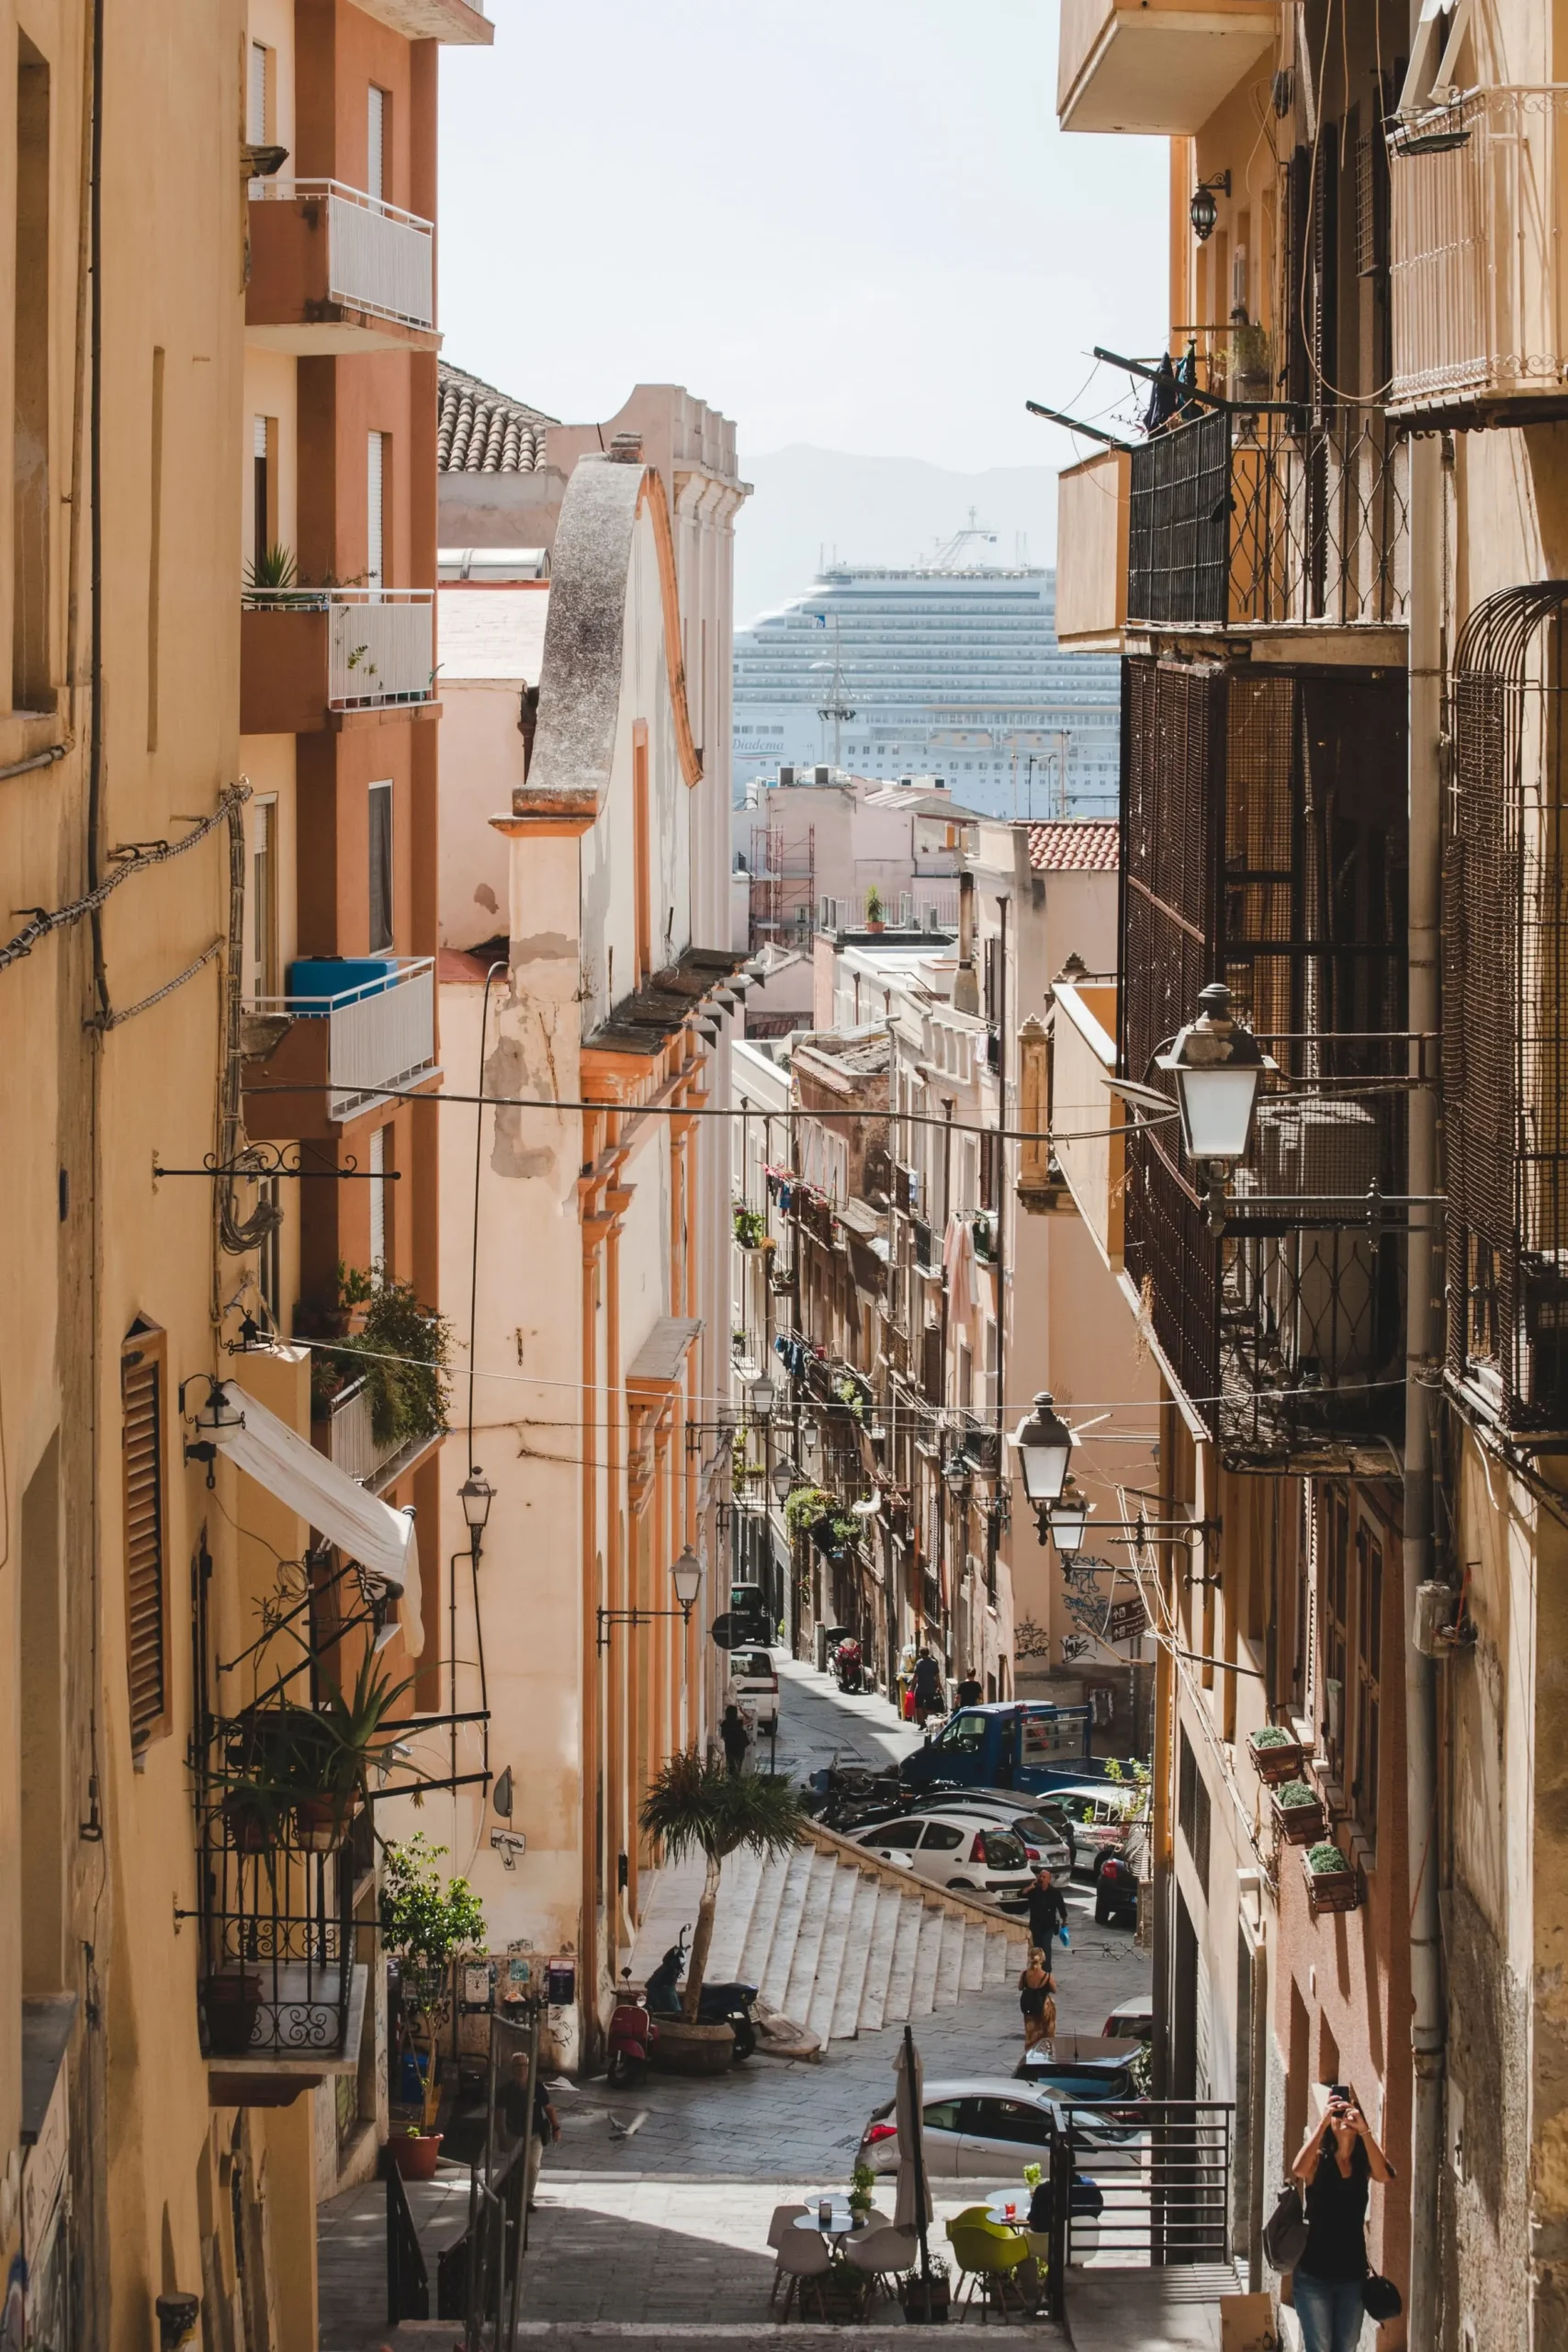 View of the maze of narrow streets in the city of cagliari